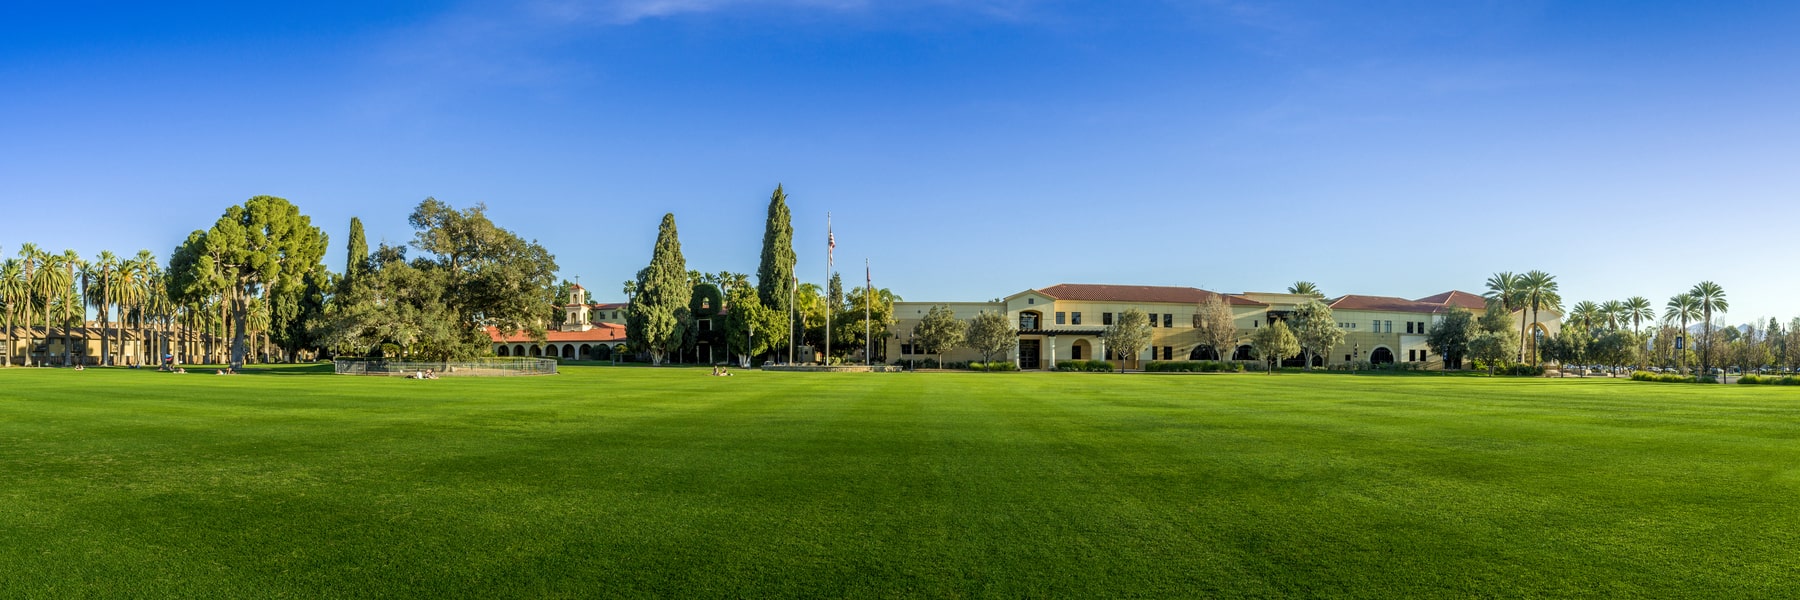 Front lawn of California Baptist University with campus buildings in the background